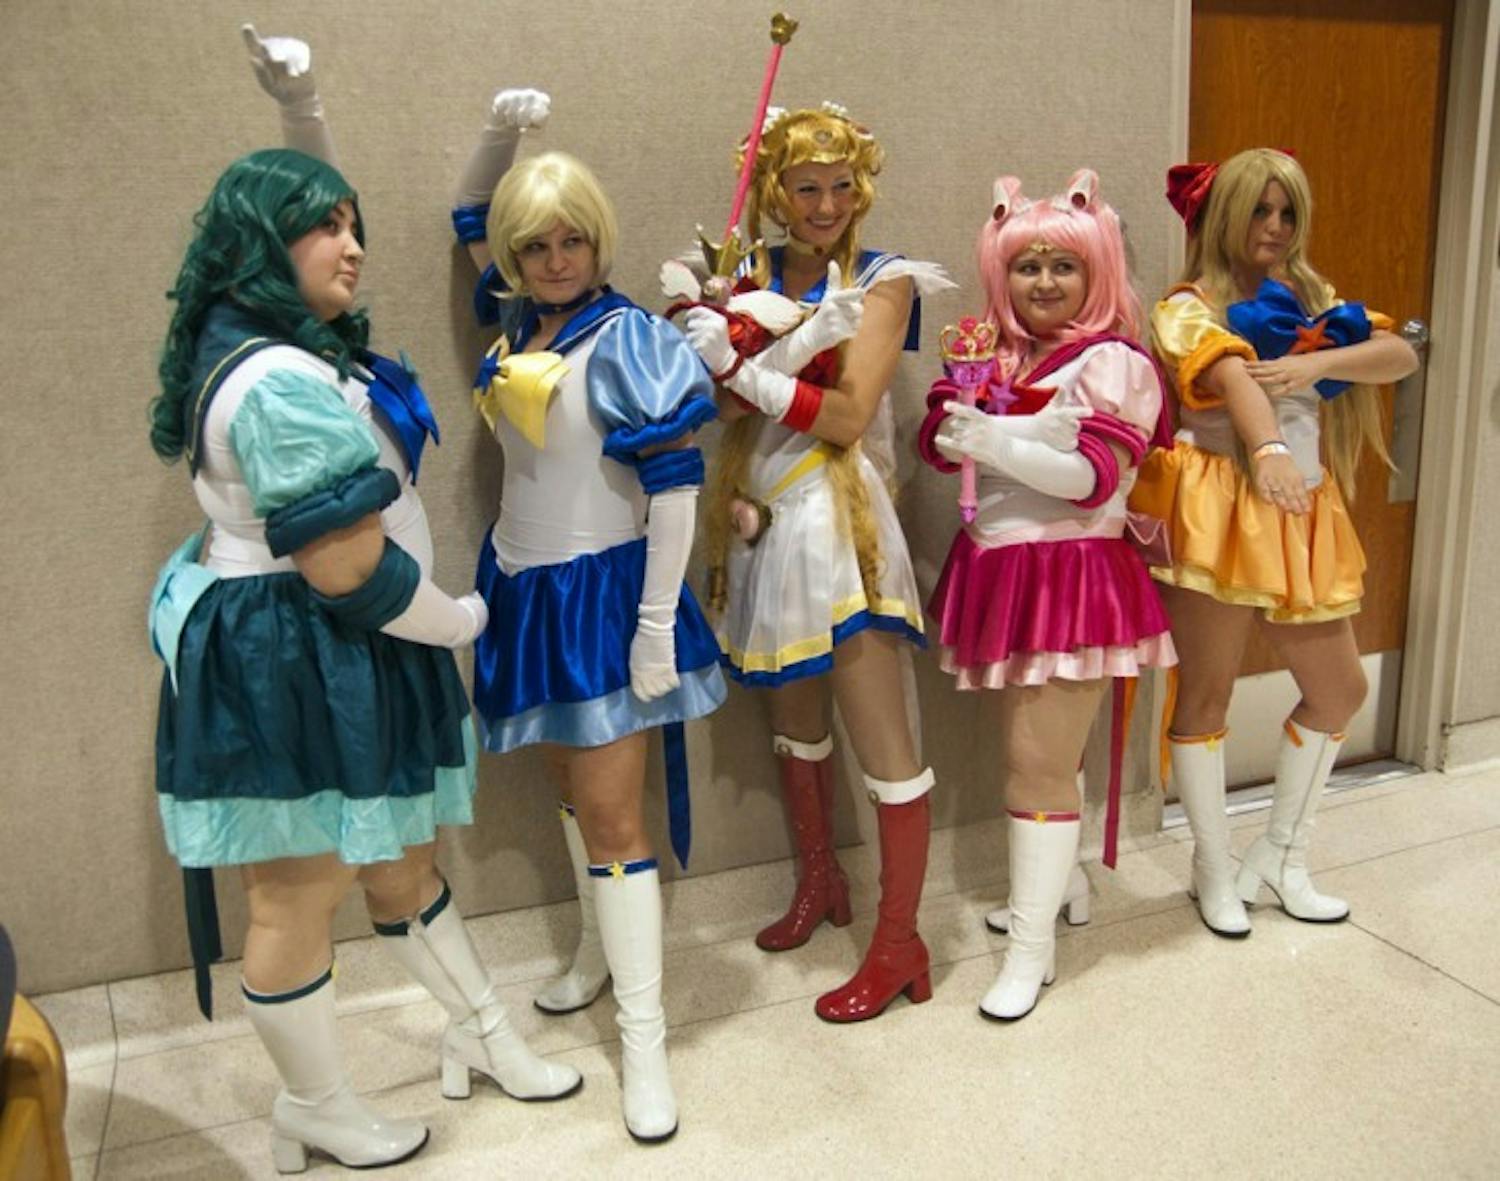 SwampCon attendees dressed as Sailor Moon characters pose for a picture at the multi-genre convention held in the Reitz Union on Saturday.